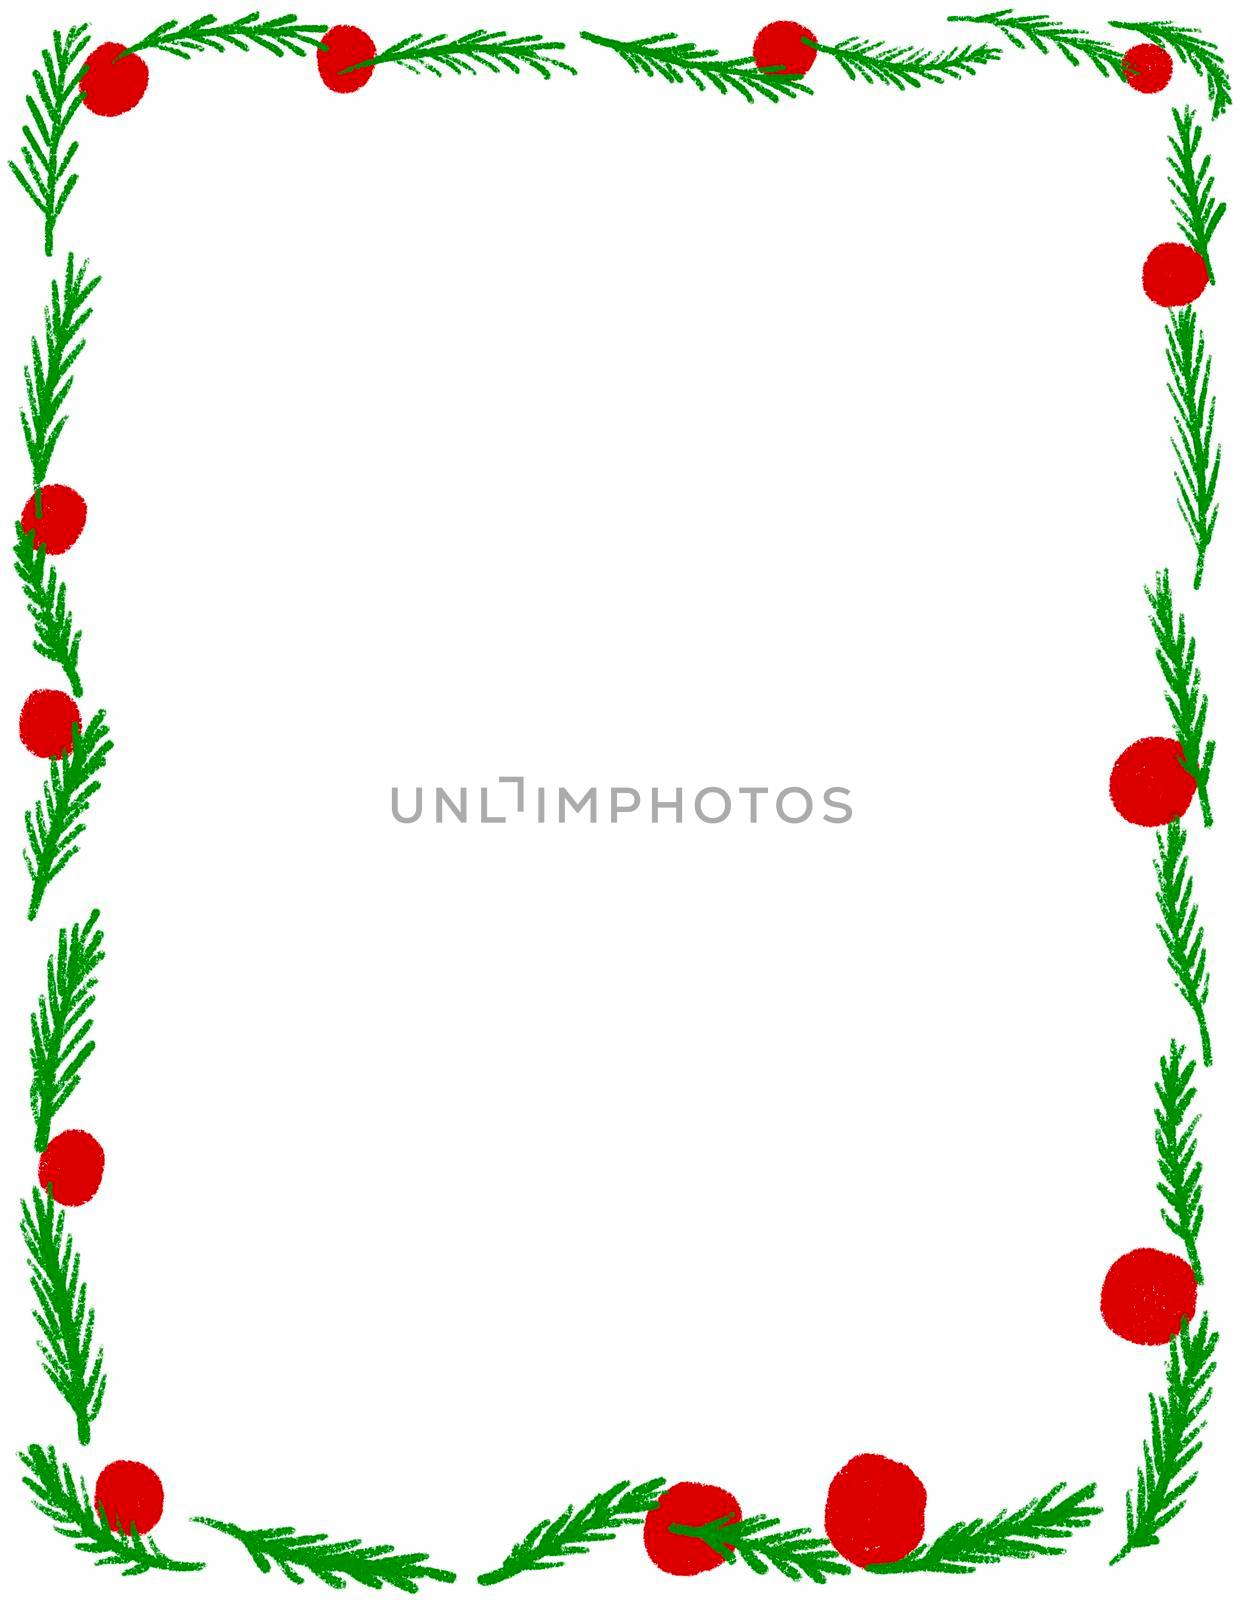 Hand drawn Christms frame with red green traditional ornaments and empty copyspace. December winter xmas decoration border, season holiday decor edge design, simple minimalist style doodle cartoon. by Lagmar